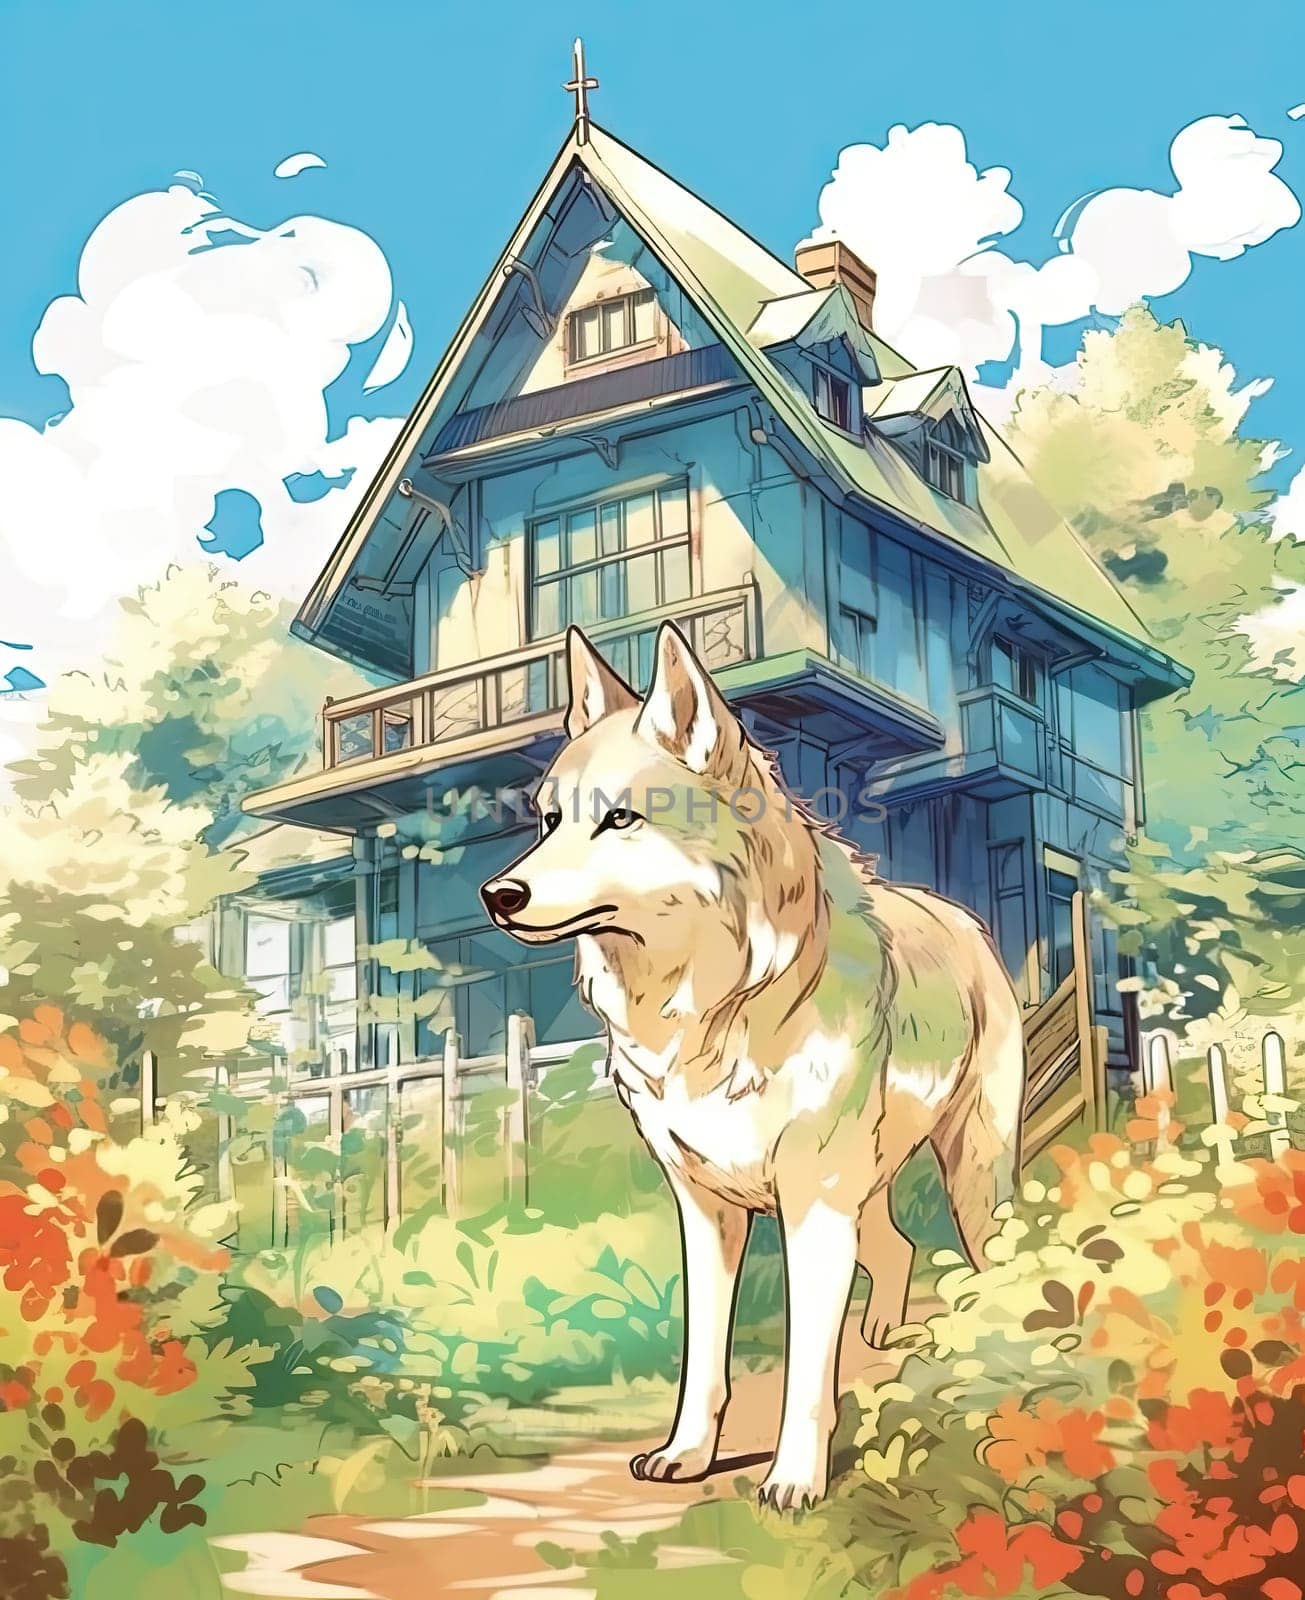 A dog standing on the grass in front of a suburban house.